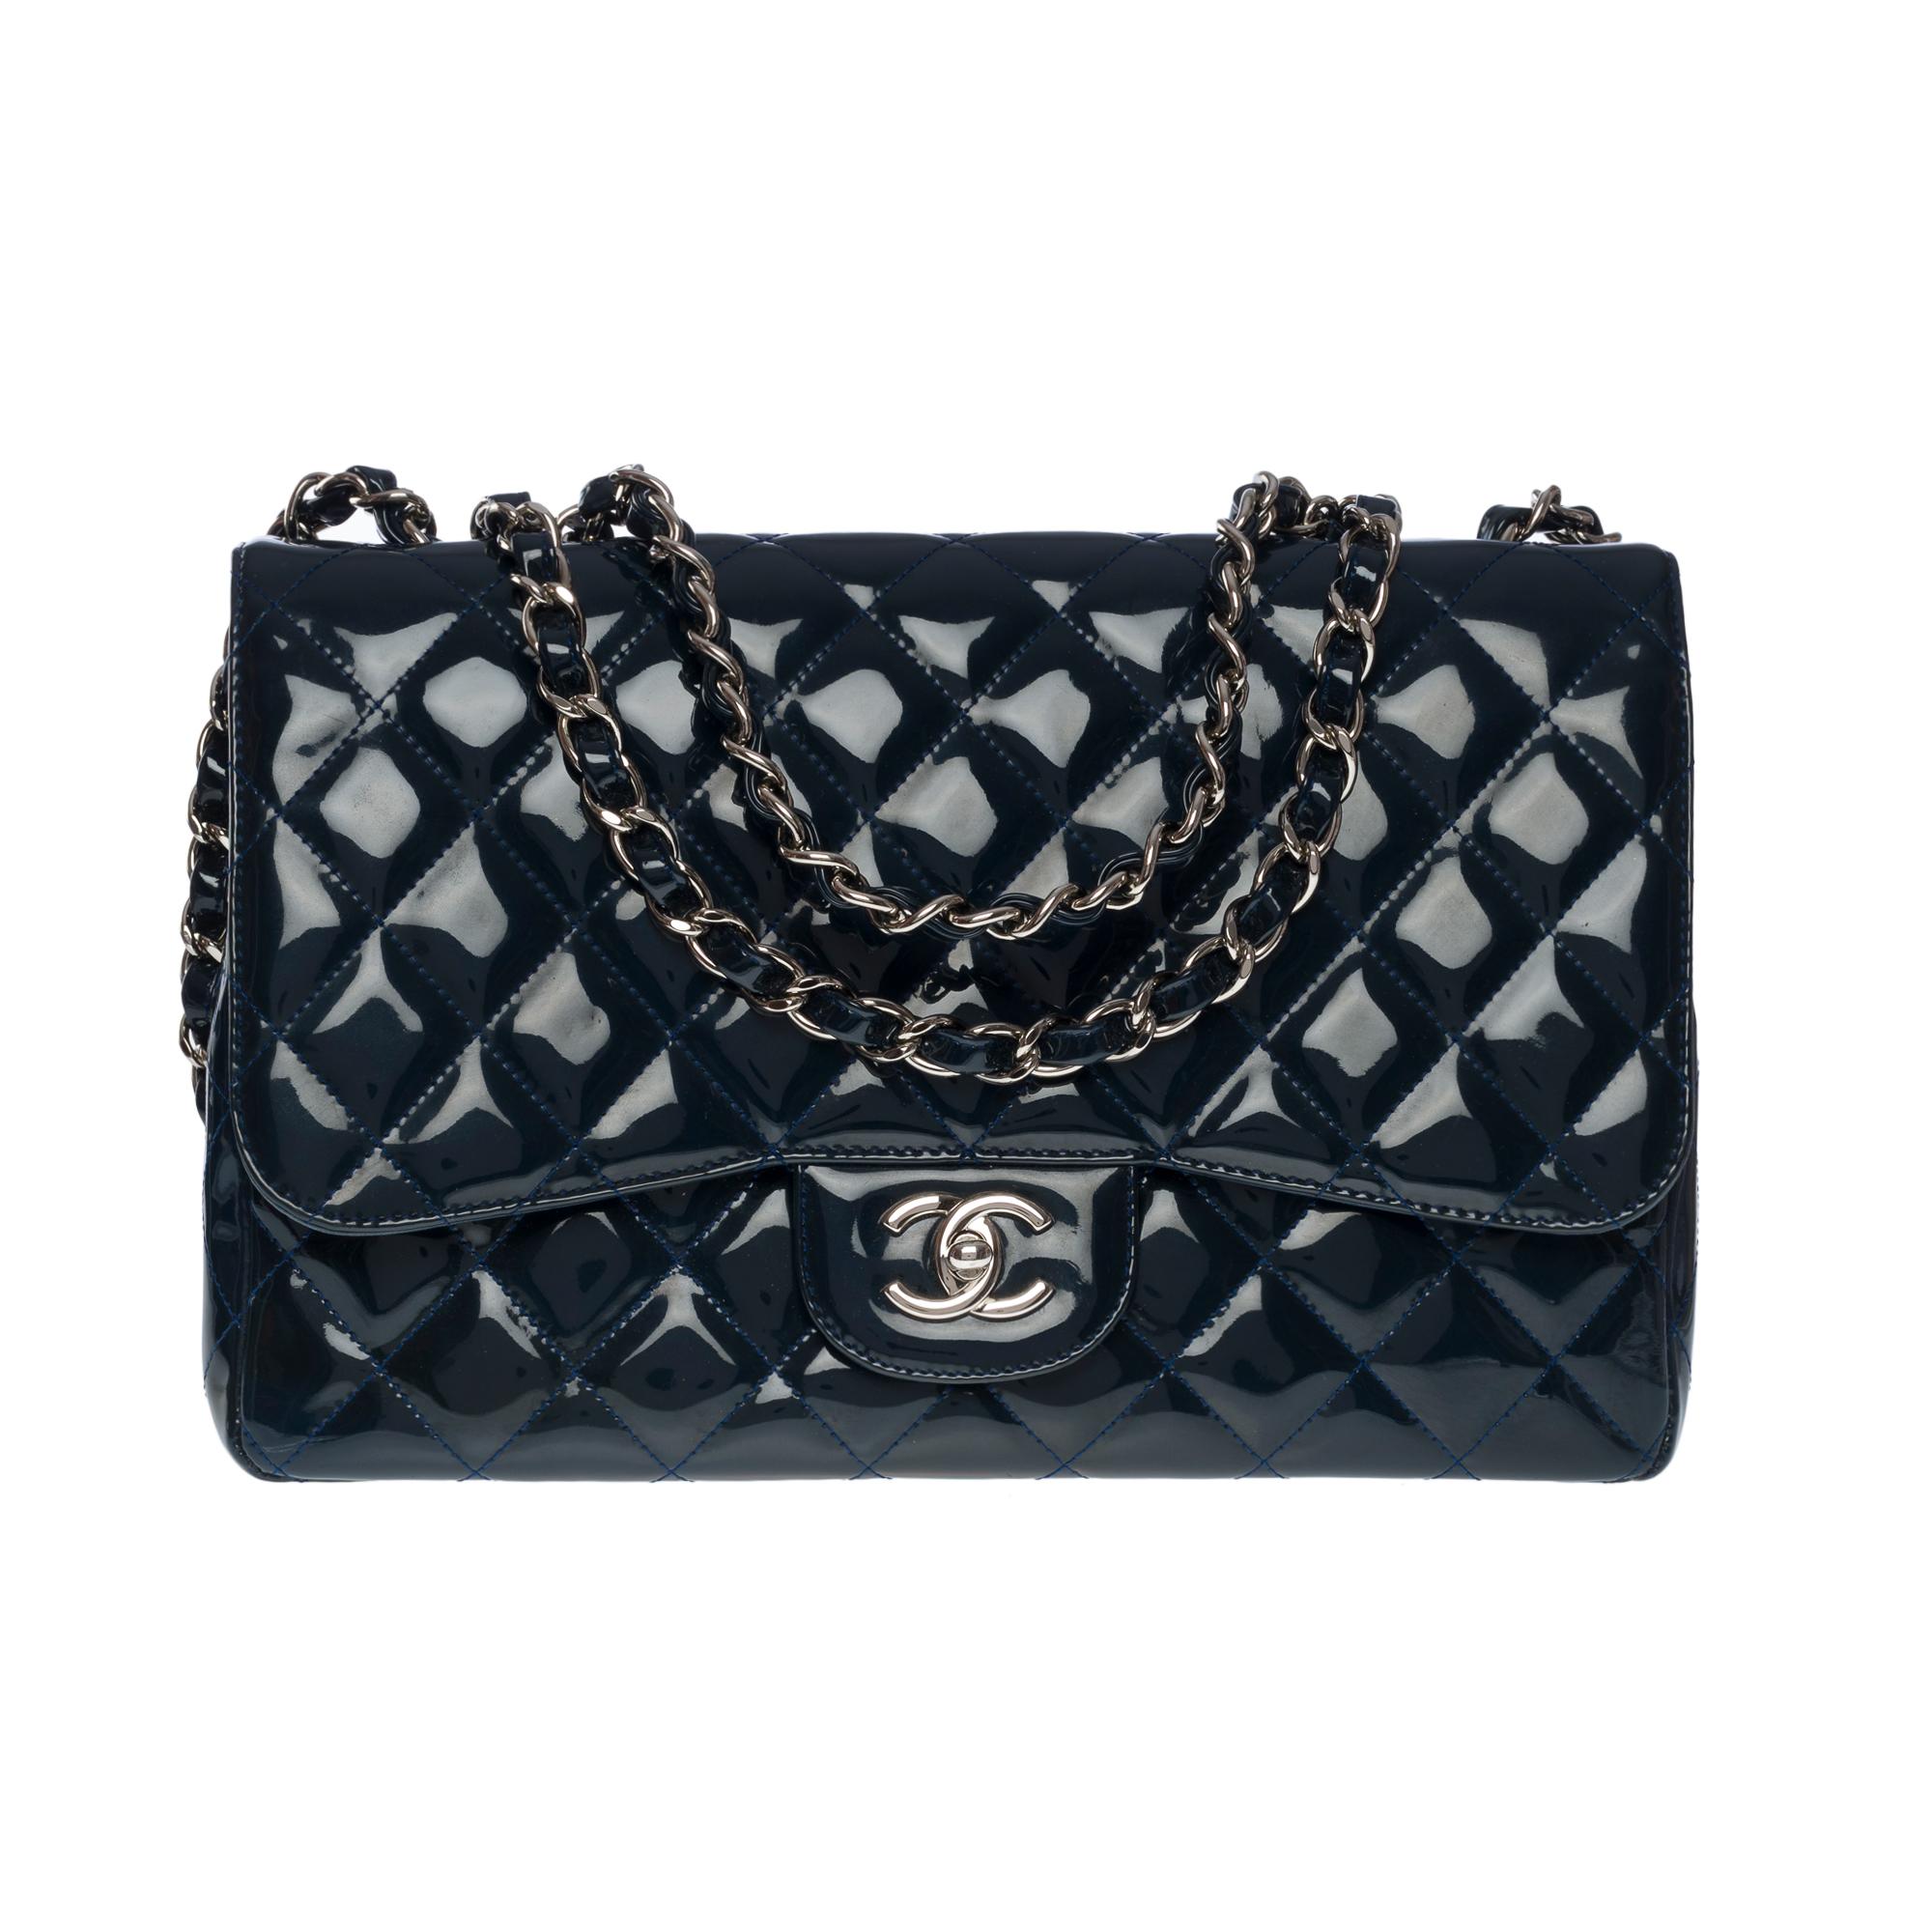 Gorgeous Chanel Timeless jumbo shoulder flap bag in navy blue quilted patent leather , silver metal hardware, silver silver metal chain handle interwoven with blue patent leather for hand or shoulder or crossbody carry

Single flap
Silver metal logo